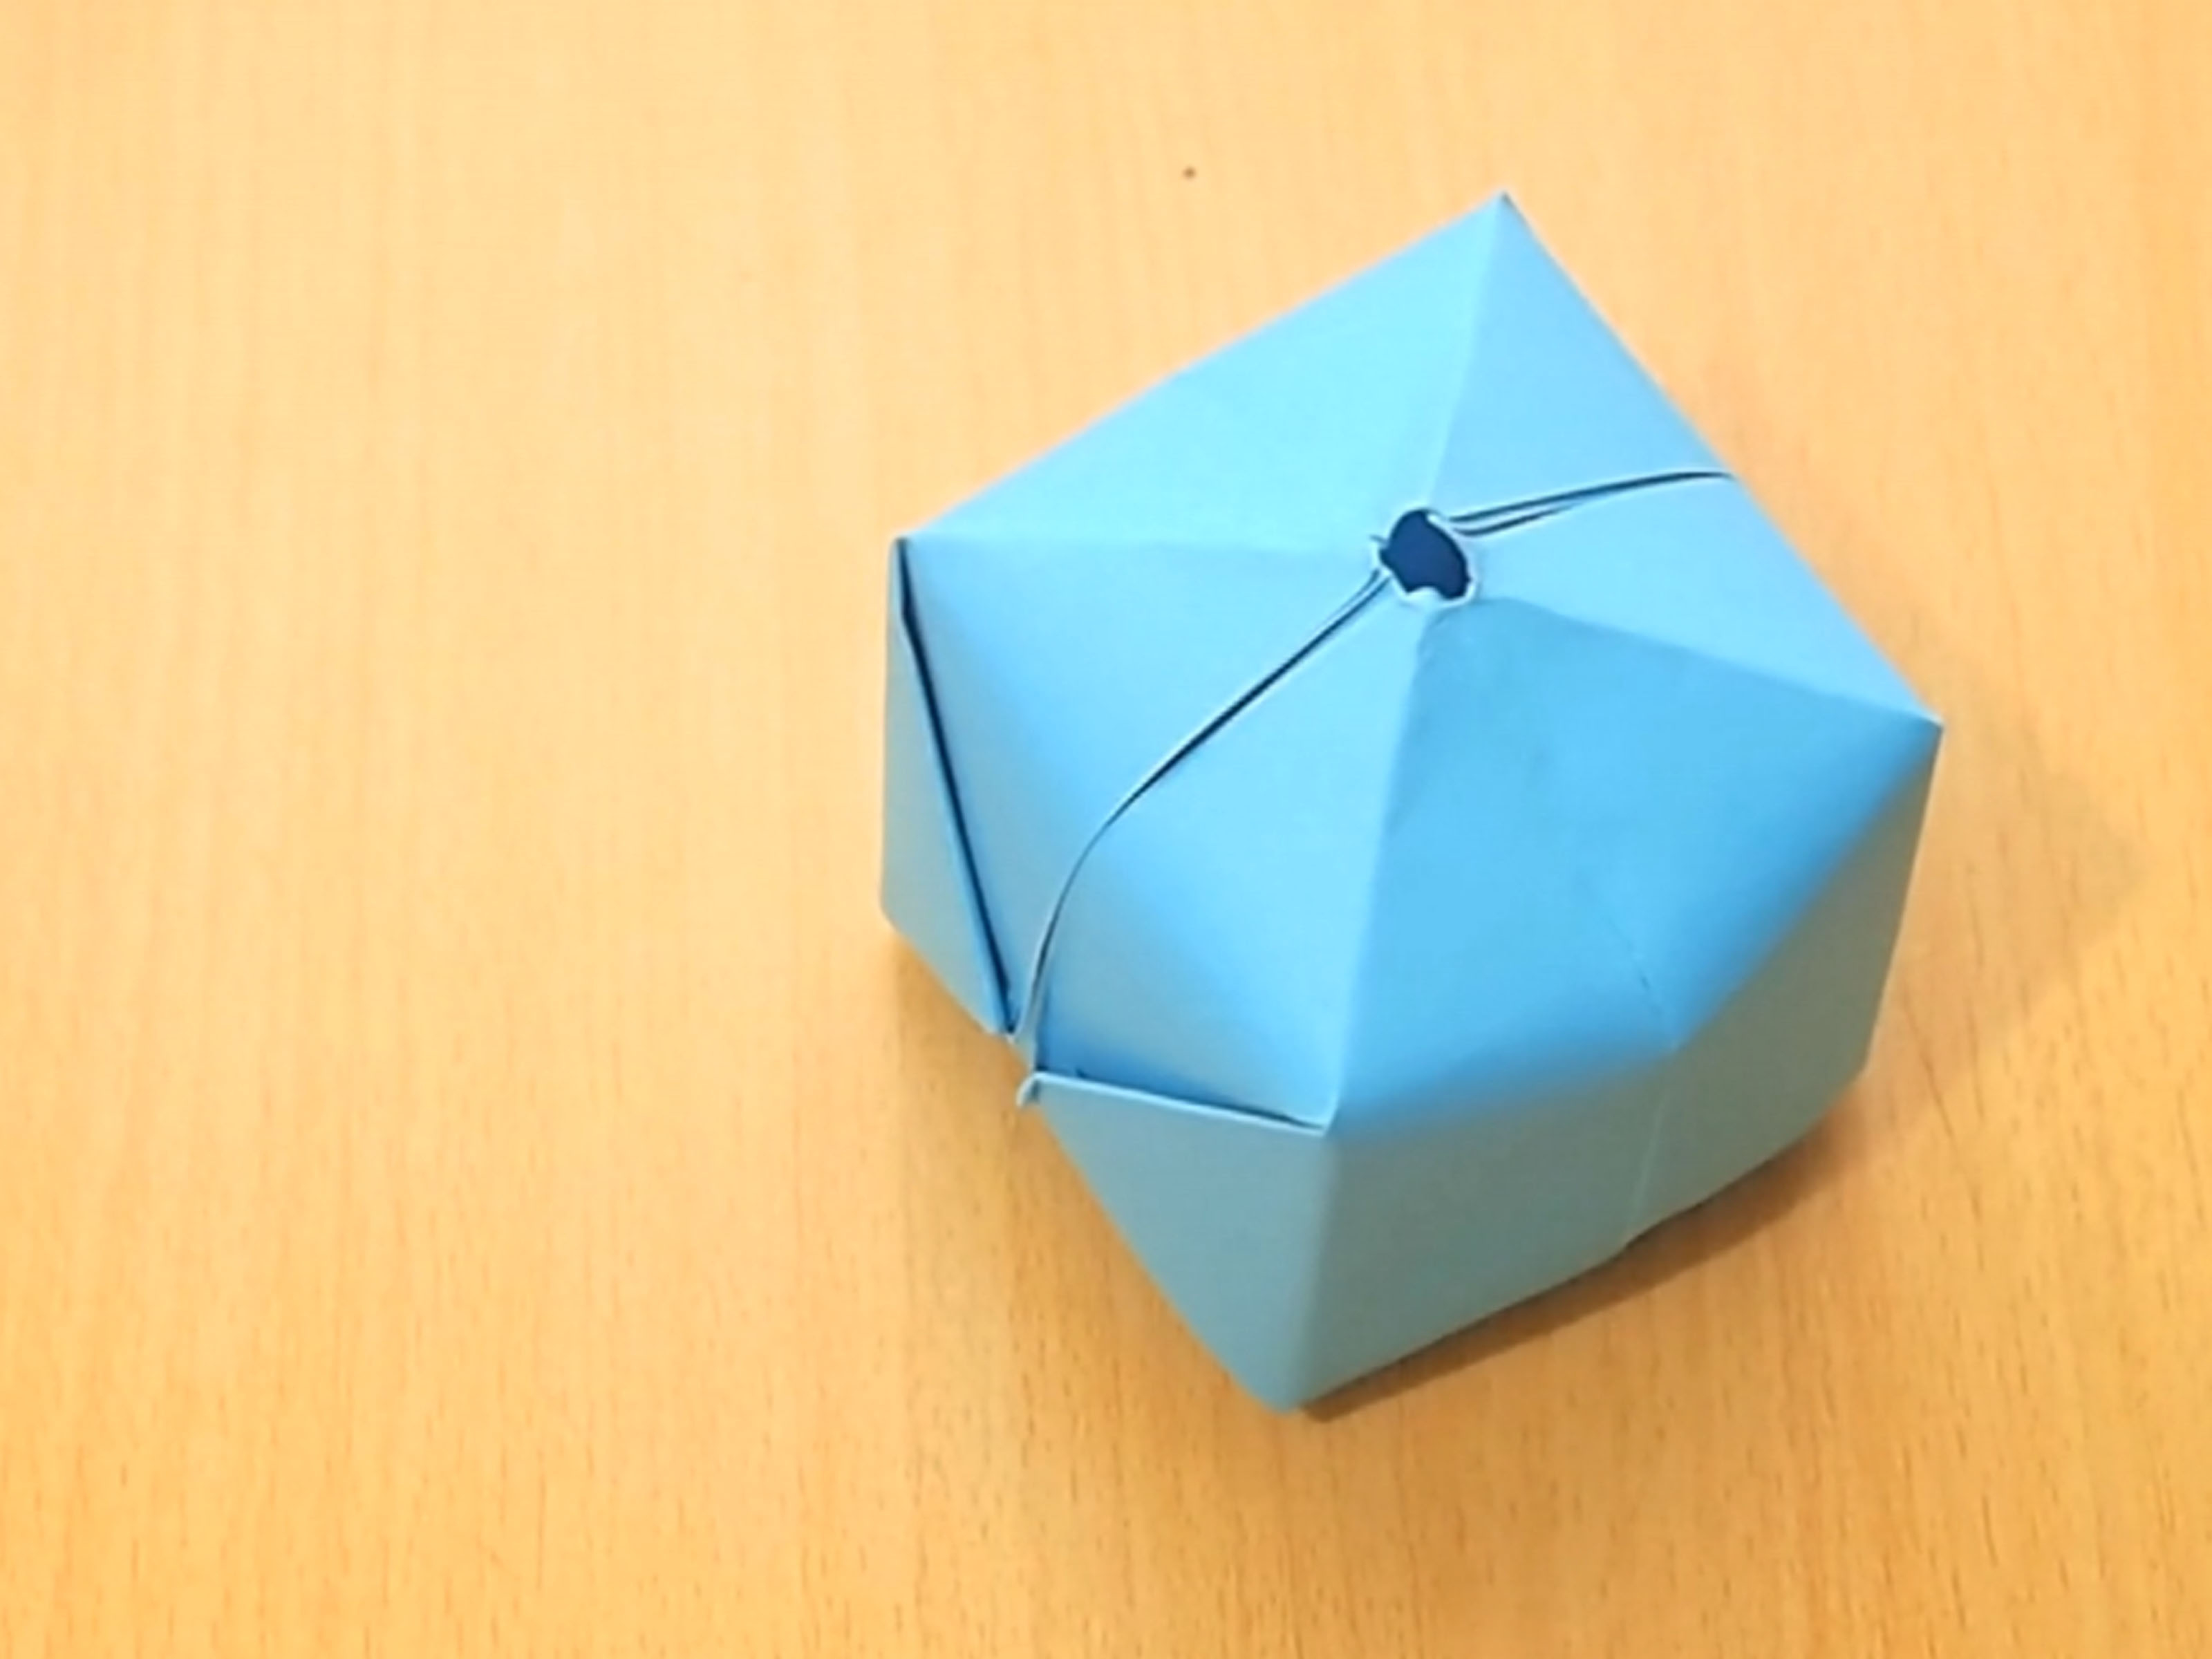 Origami Sphere Easy How To Make An Origami Balloon 8 Steps With Pictures Wikihow